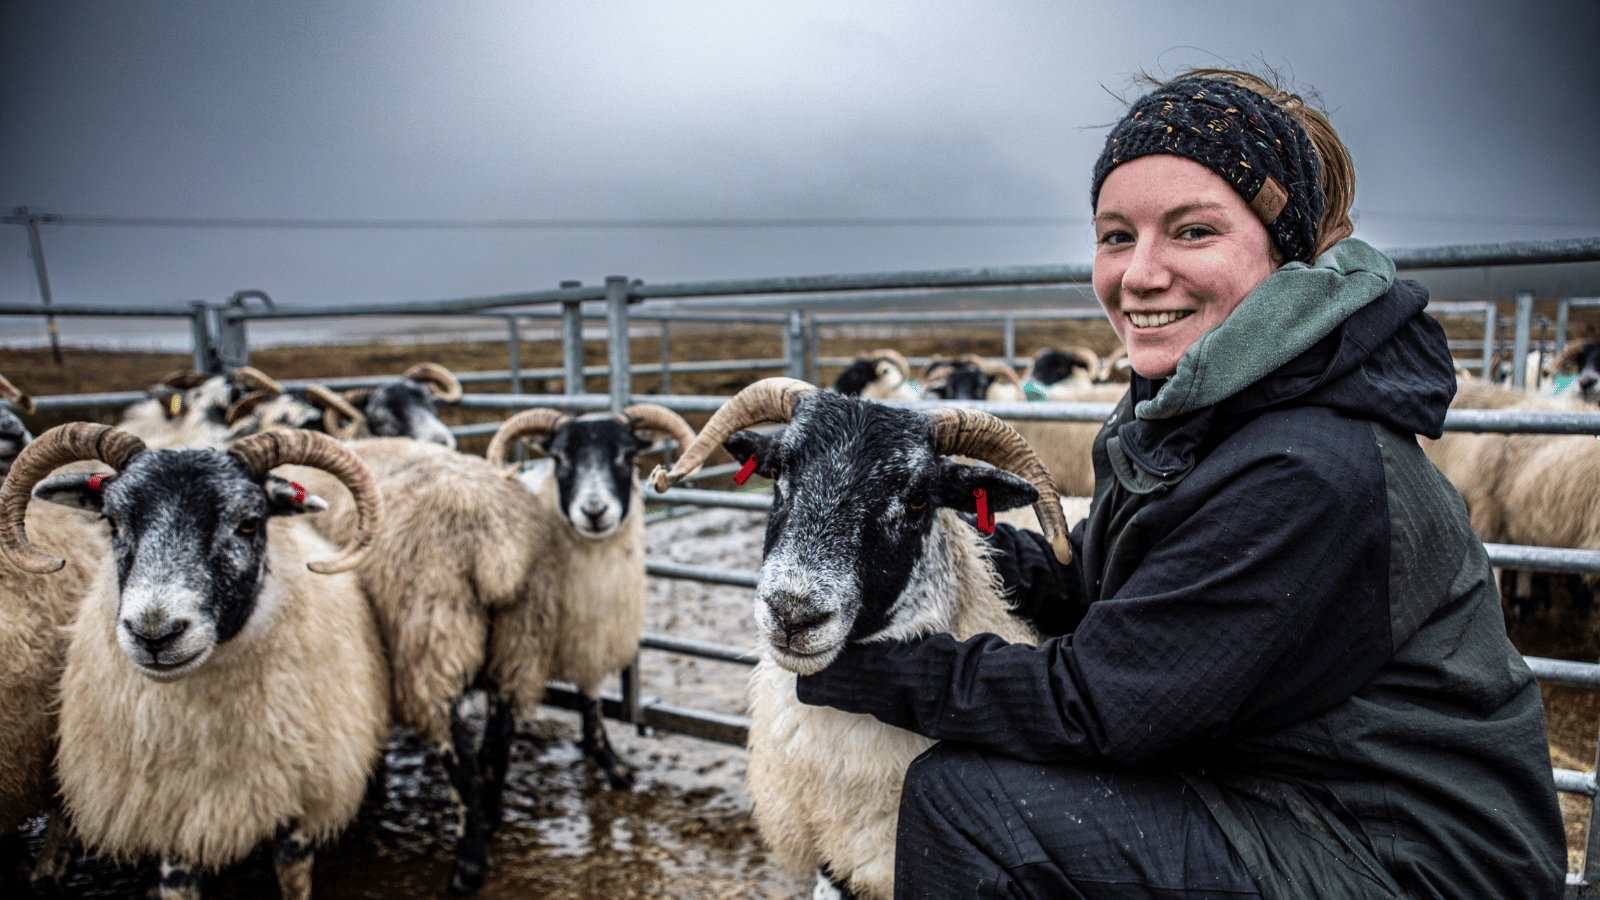 Still from This Framing Life. Carianne, Ardbhan Croft smiling outiside beside sheep pen.